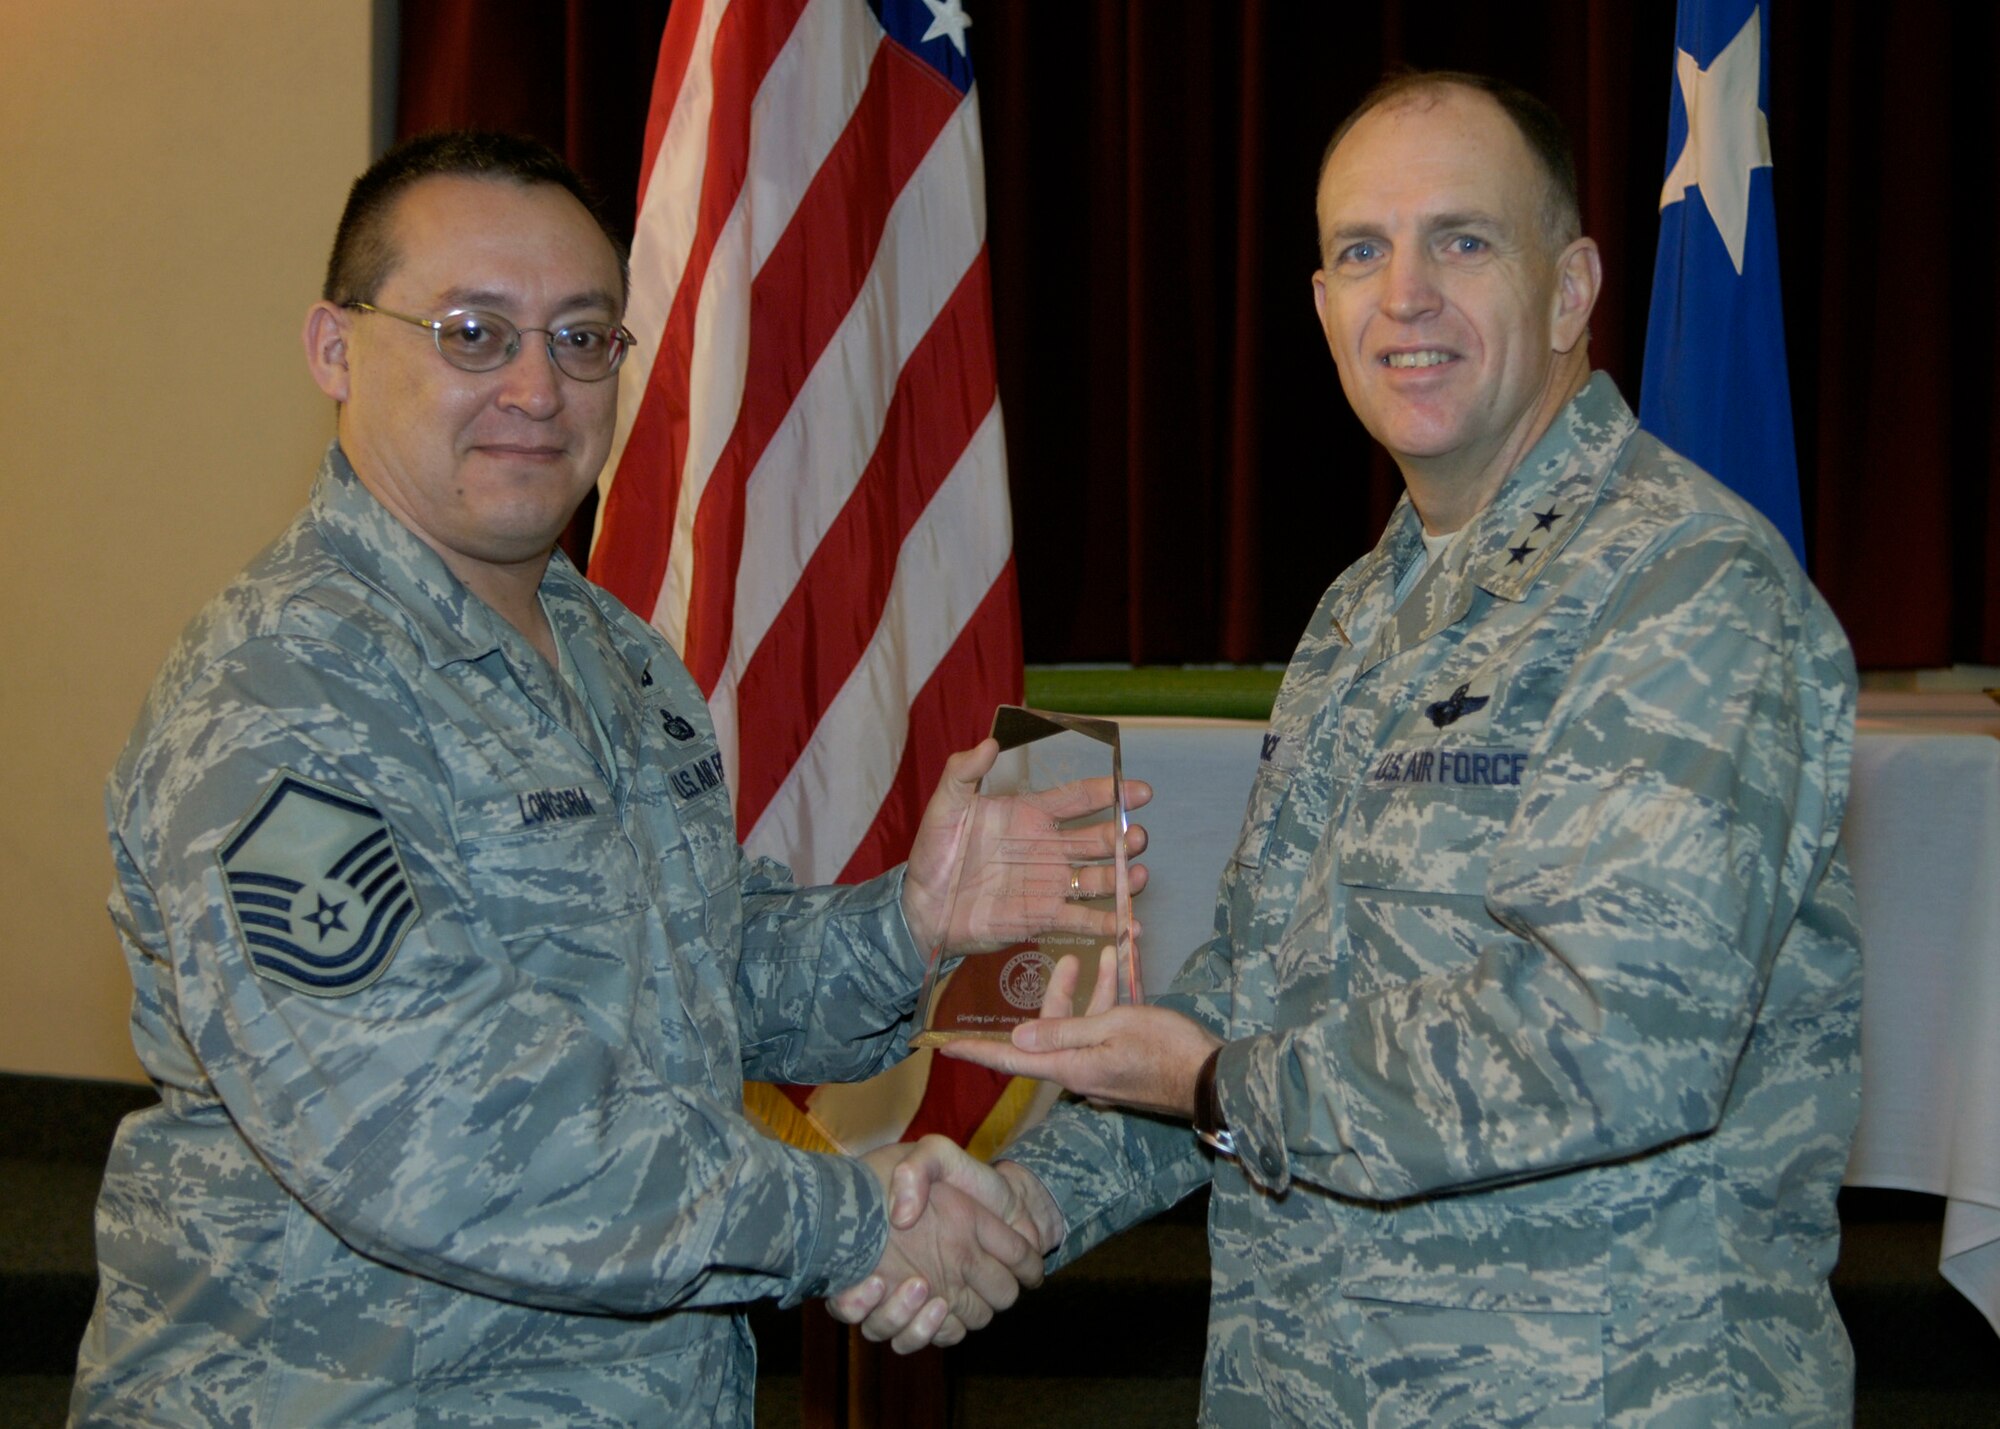 Maj. Gen. Ralph Jodice, Air Force District of Washington commander, presents the AFDW Oustanding Chaplain Corps Senior NCO of the Year Award to Master Sgt. Christopher Longoria. The award presentation took place Feb. 25, 2009, at the Andrews Air Force Base, Md., chapel.  (U.S Air Force photo by Senior Airman Renae Kleckner.)